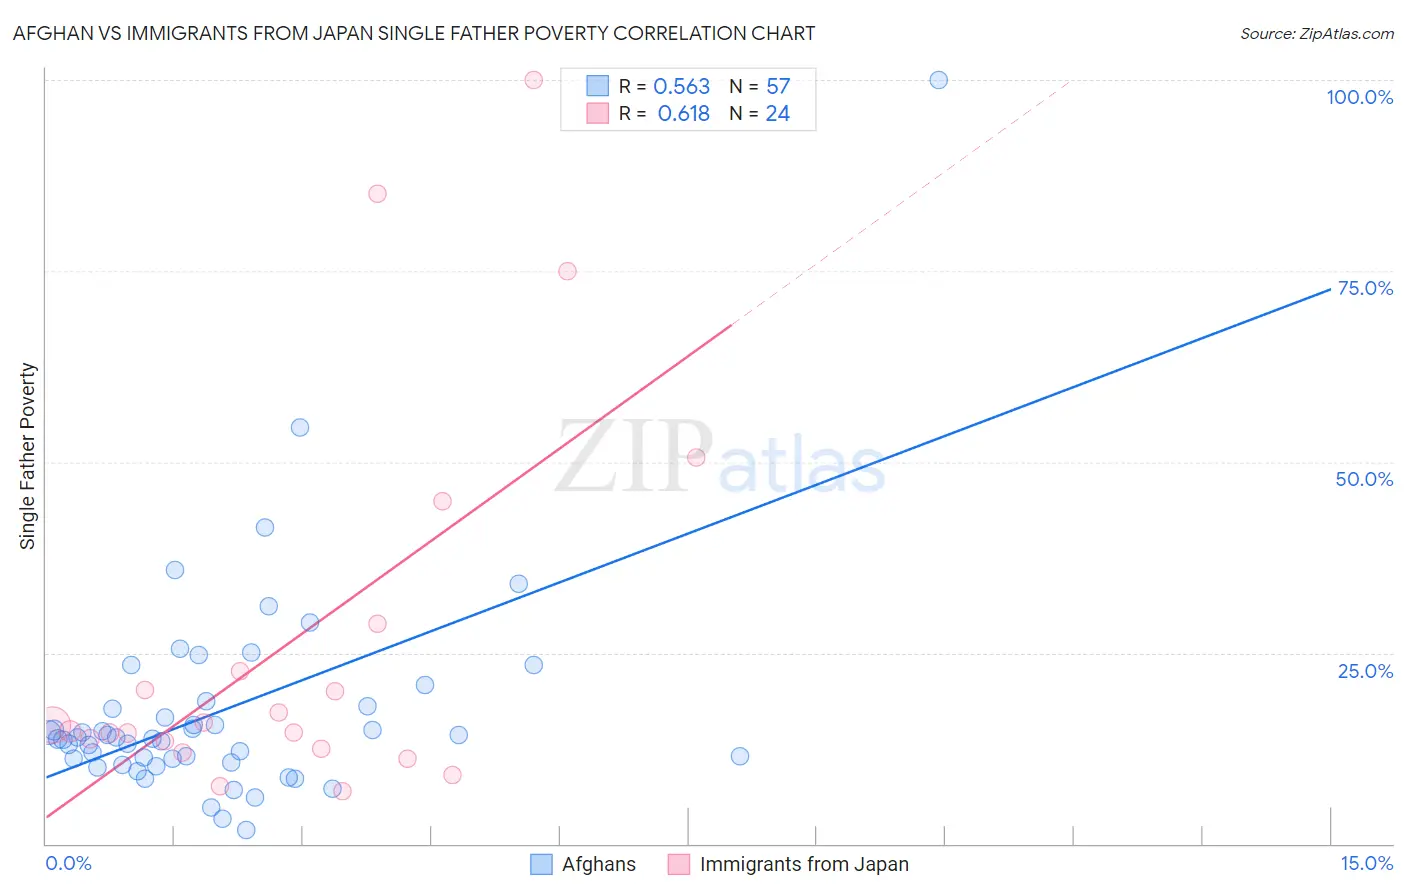 Afghan vs Immigrants from Japan Single Father Poverty